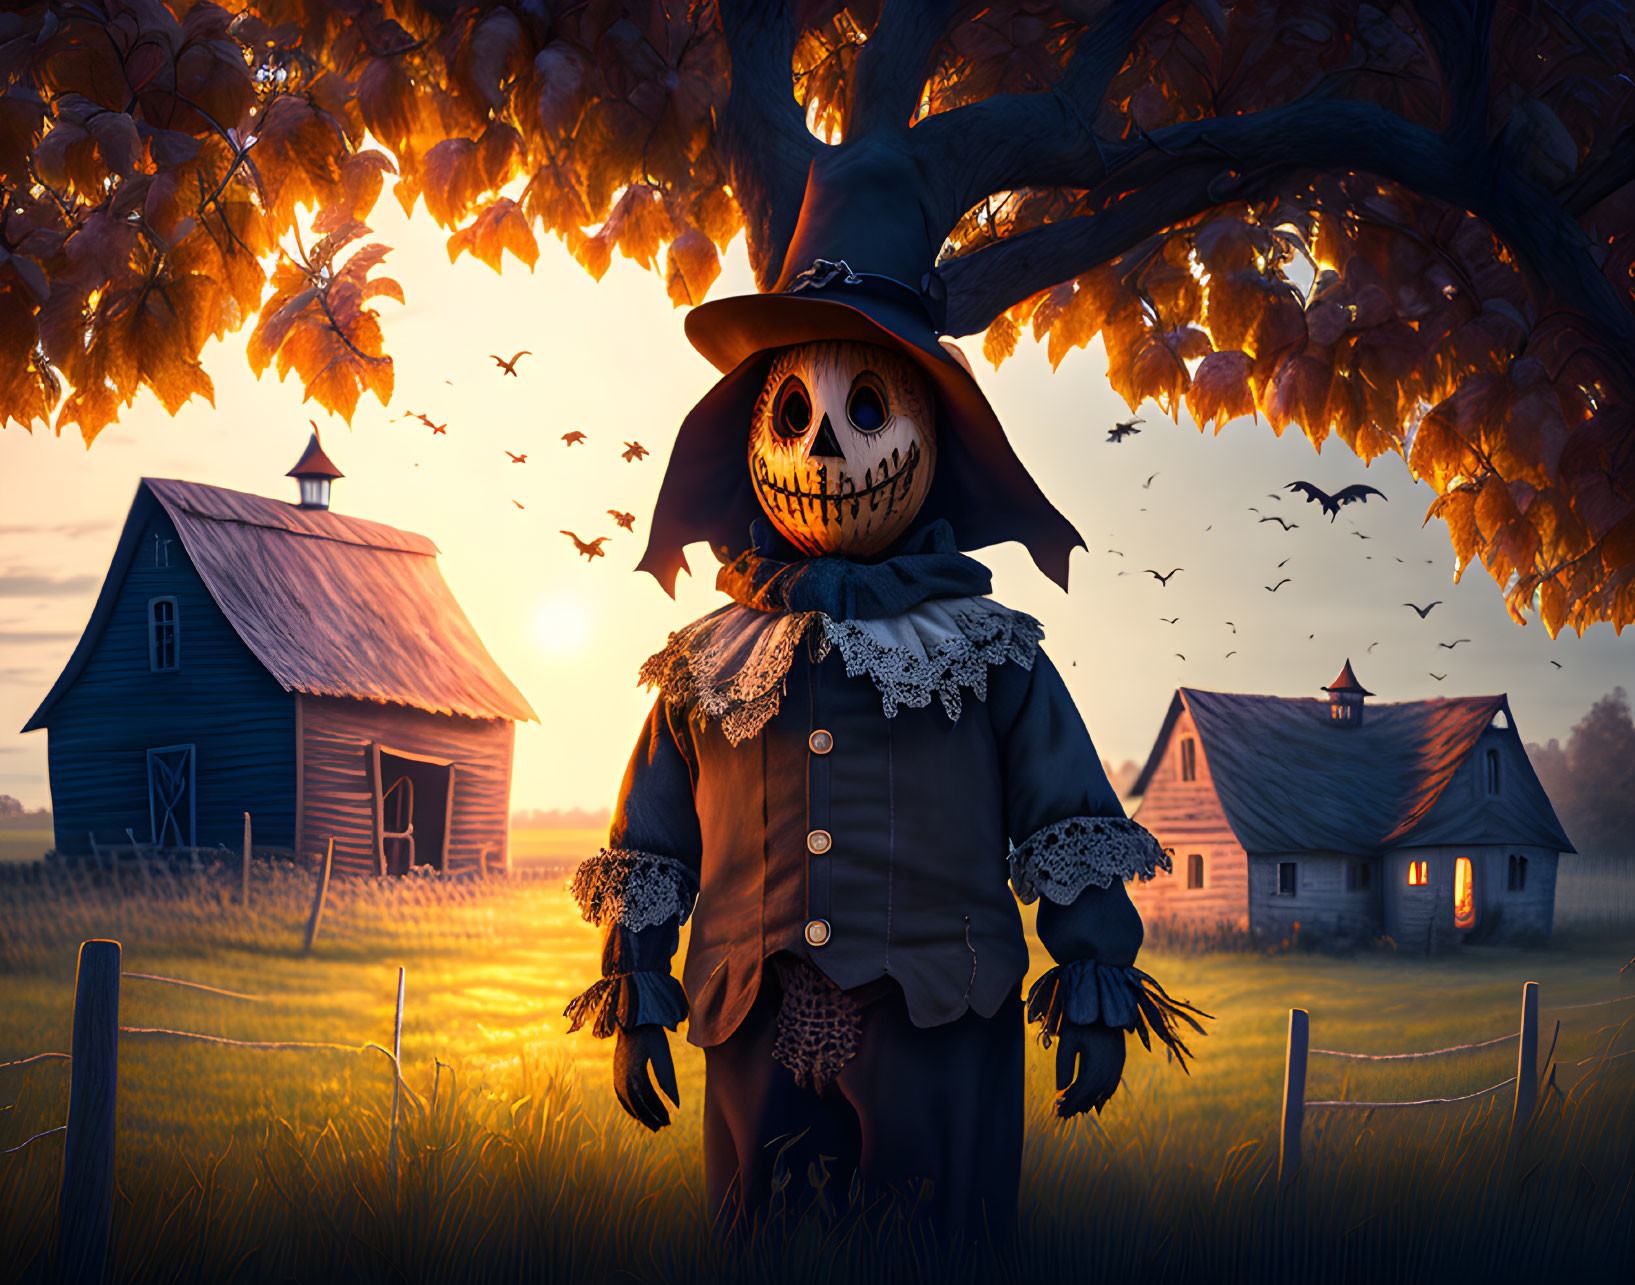 Menacing scarecrow with pumpkin head in field at sunset